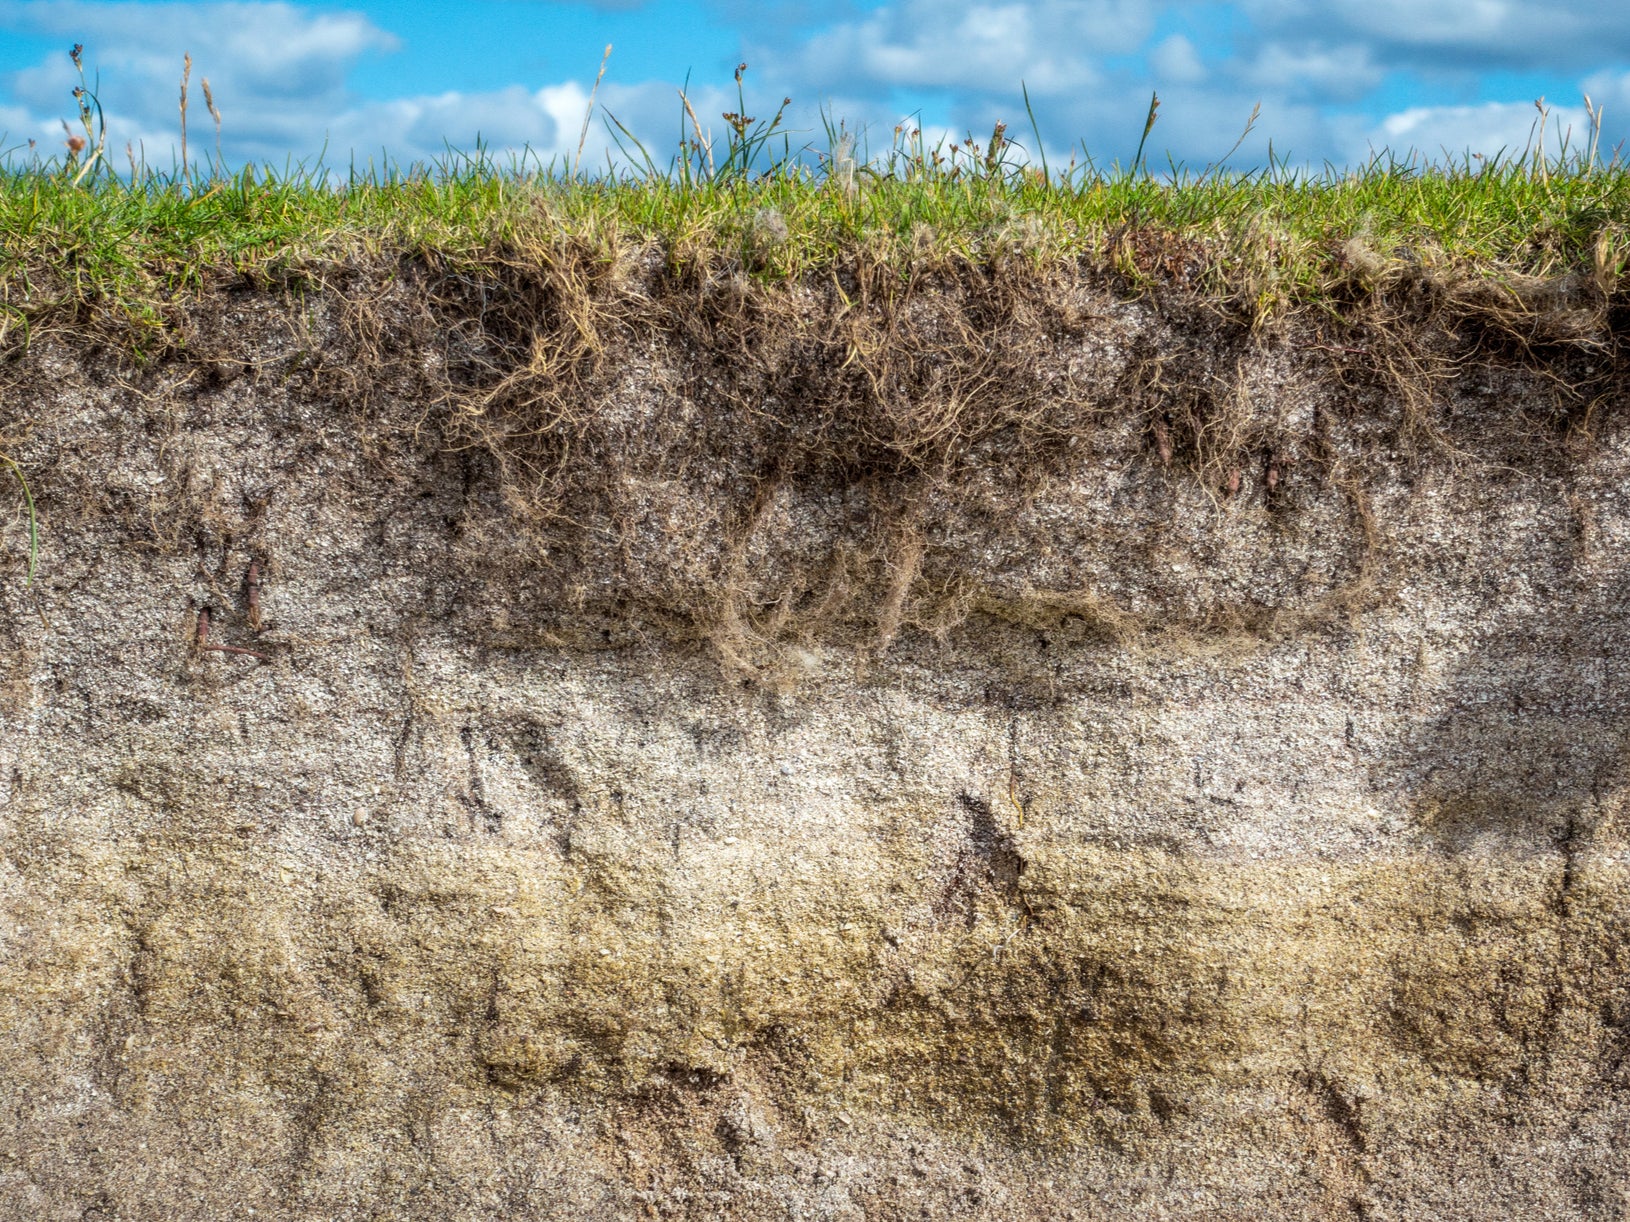 Climate crisis: Global temperature rise of 2C ‘would release billions of tonnes of soil carbon’